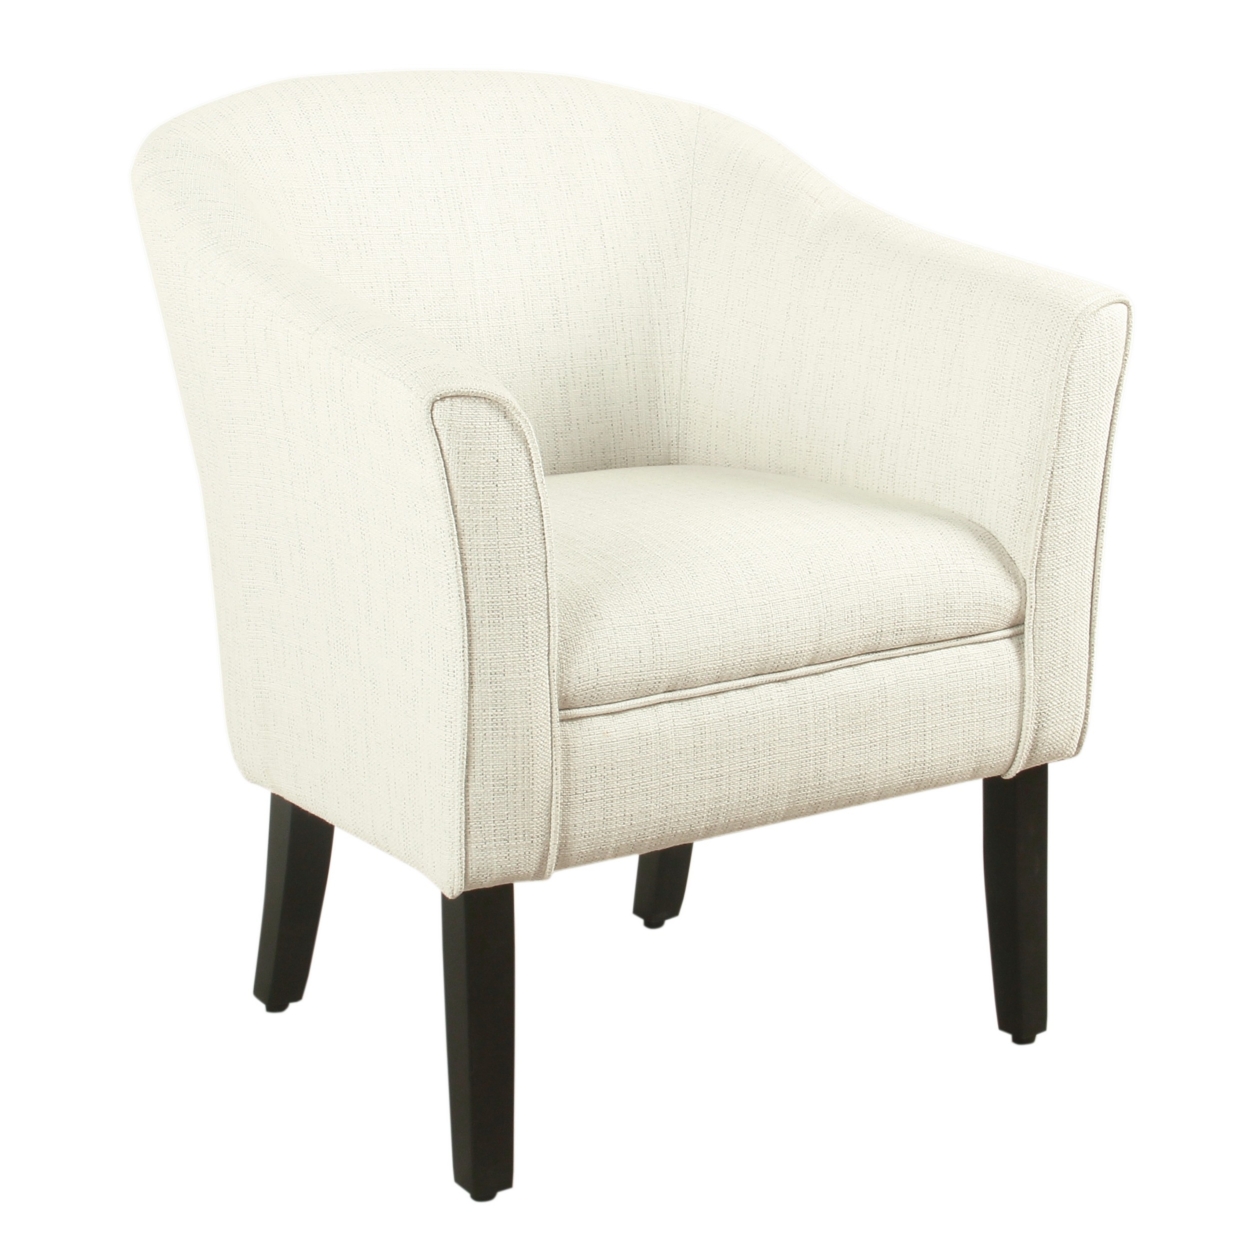 Fabric Upholstered Wooden Accent Chair With Barrel Style Back, White And Black- Saltoro Sherpi